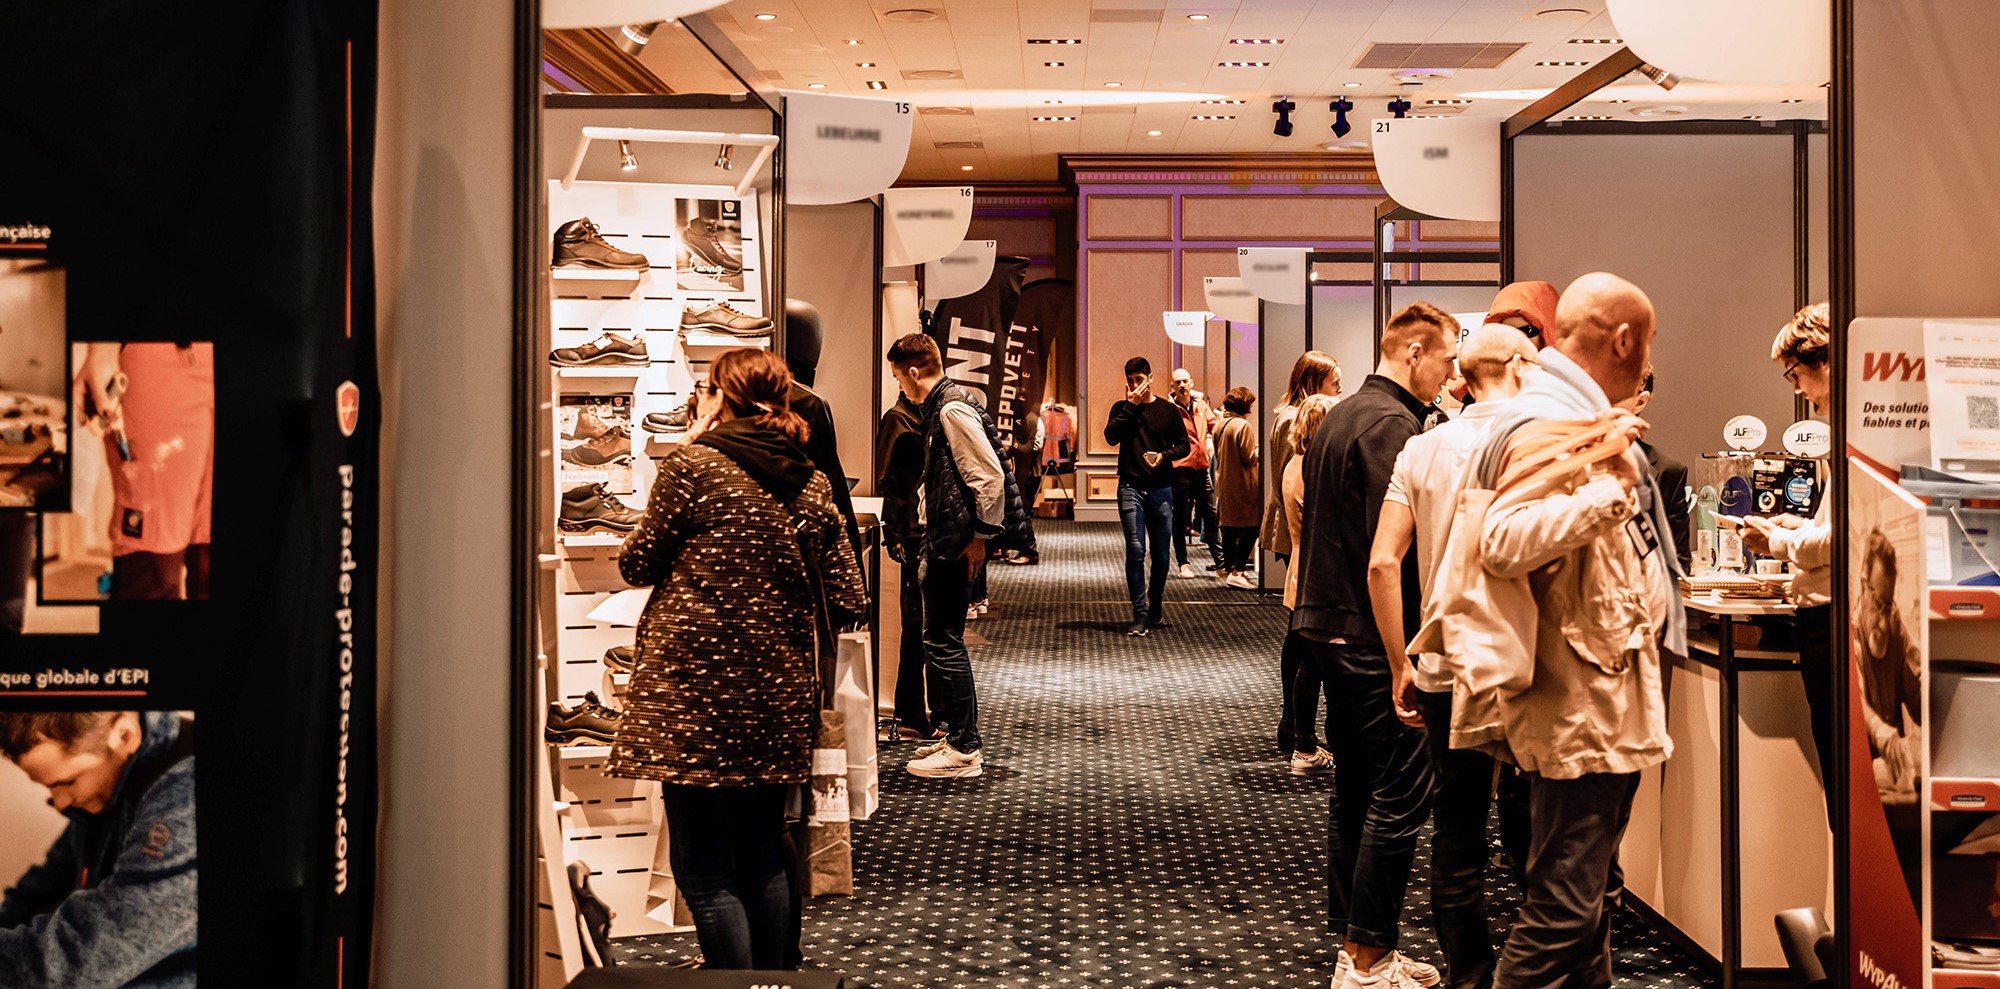 Organizing your trade show